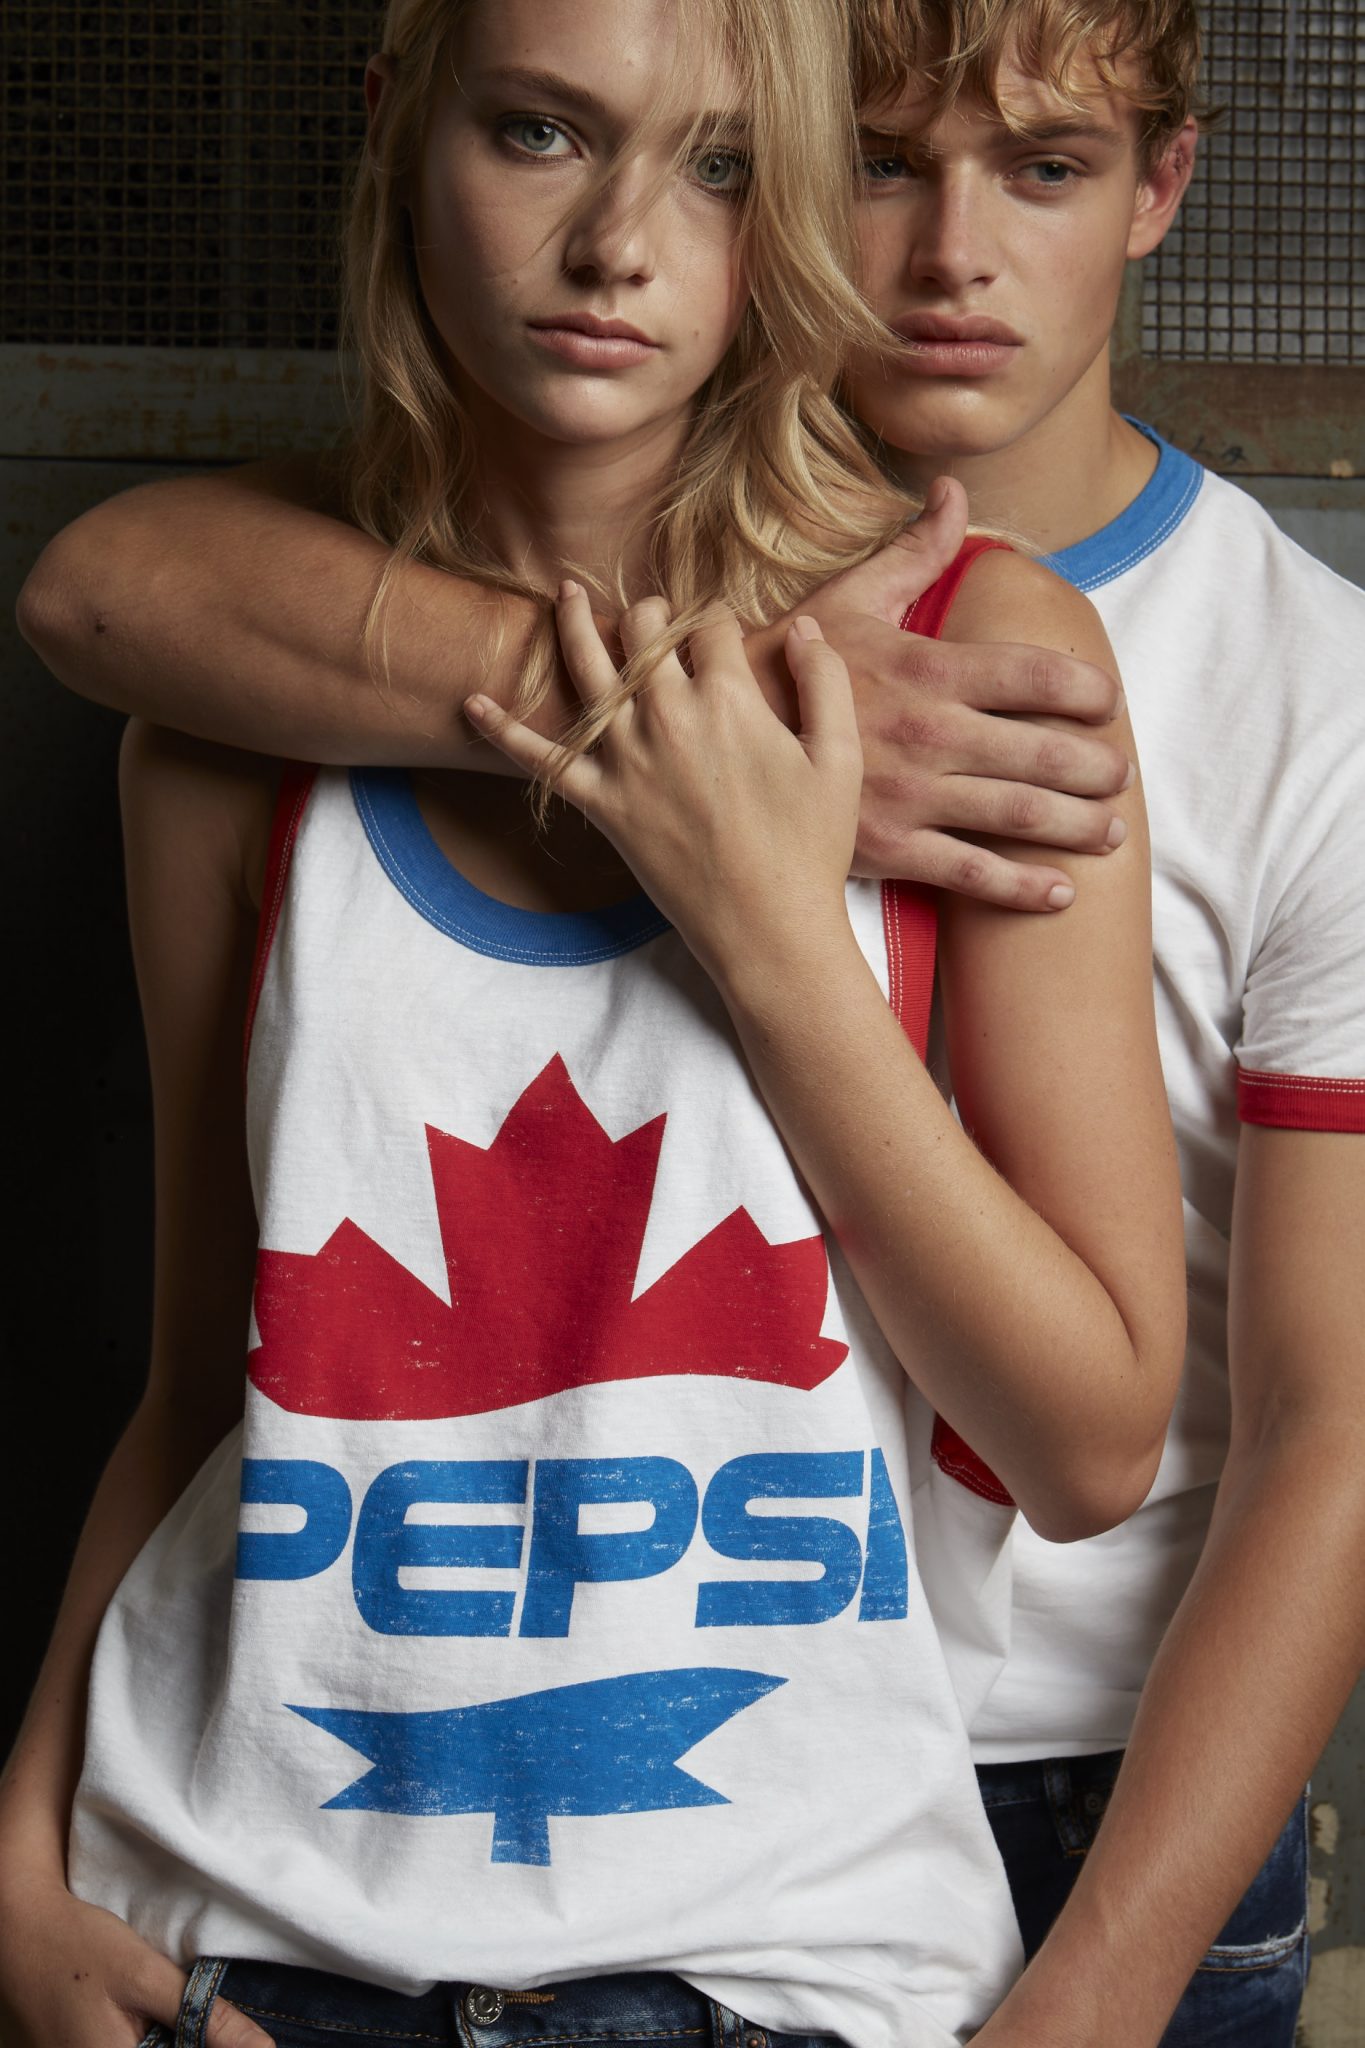  Dsquared2 x Pepsi Spring/Summer 2020 Capsule Collection.